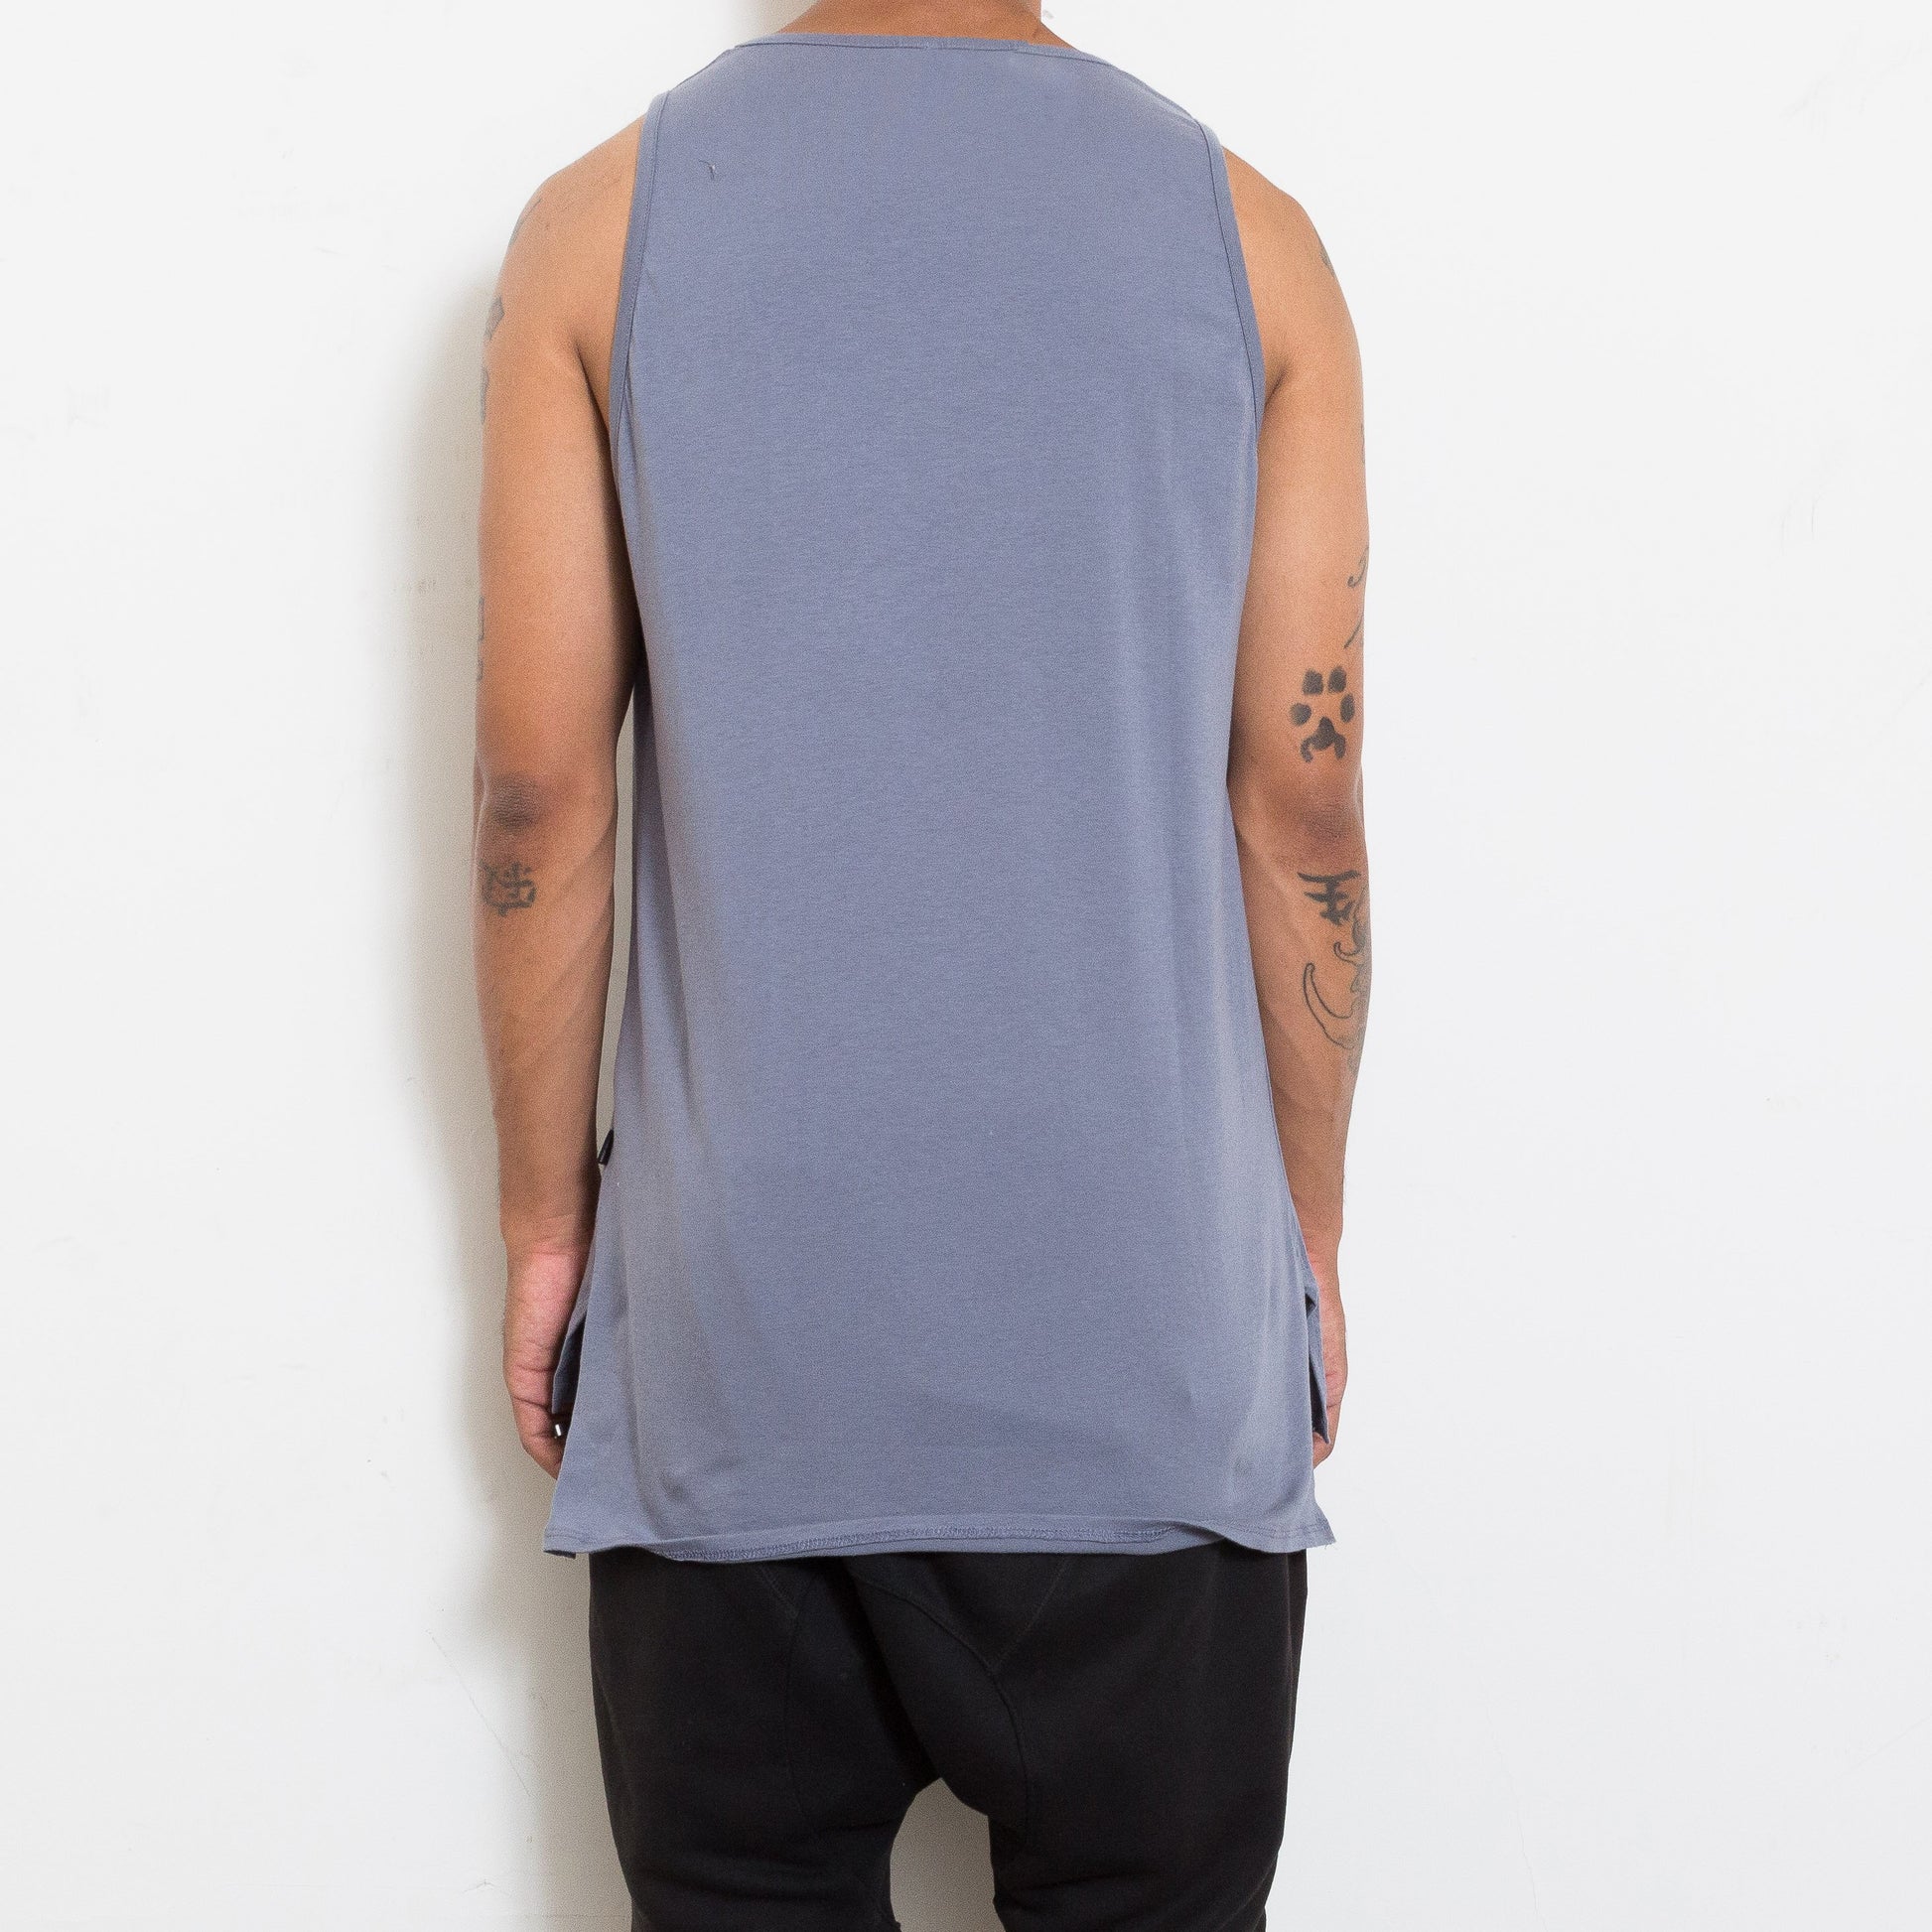 Picture of a Plain Men's Grey Tank Top back view